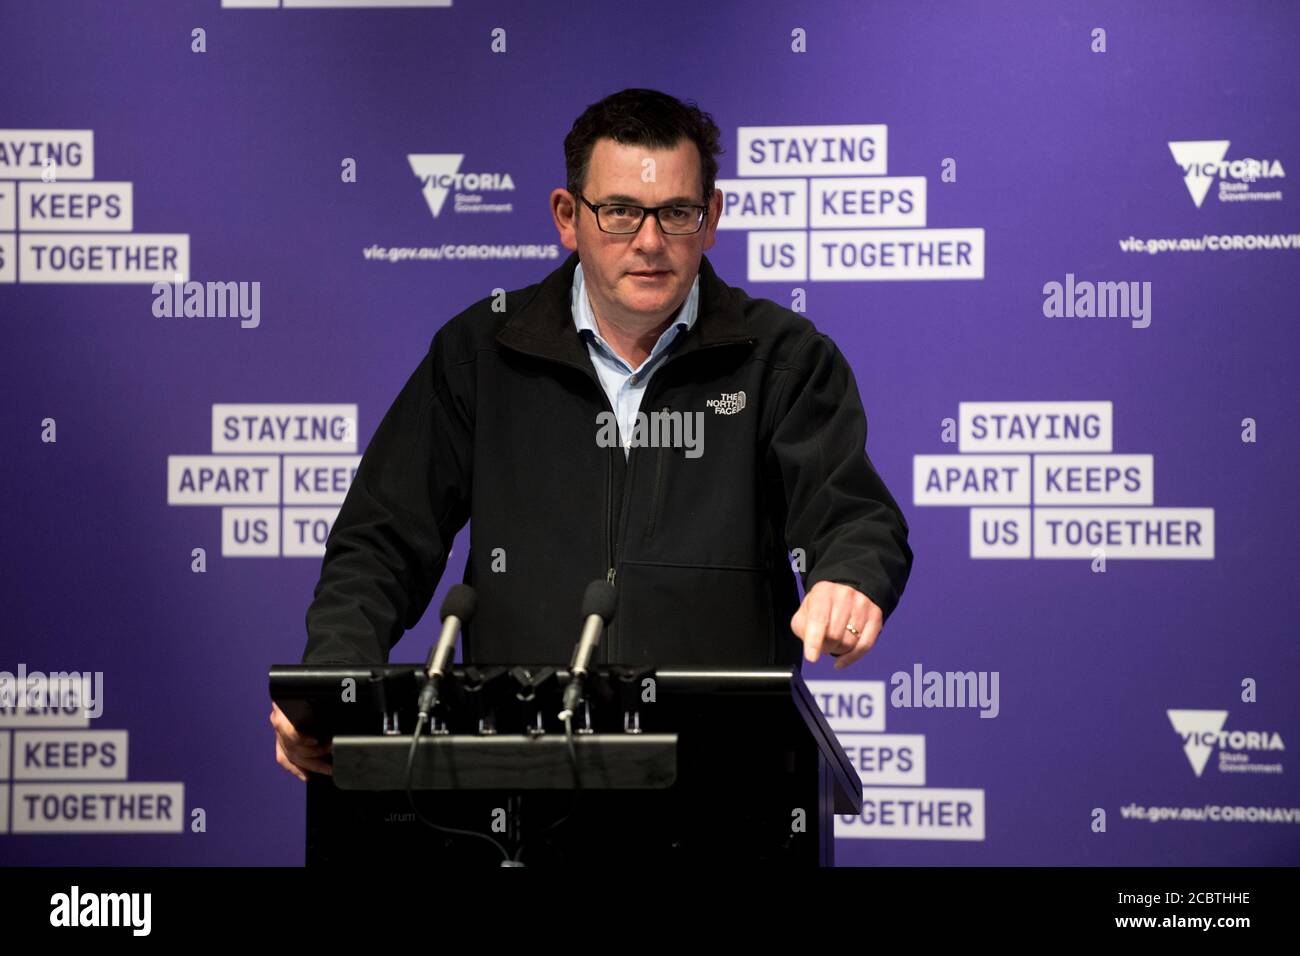 Melbourne, Australia, 15 August 2020, Victorian State Premier Daniel Andrews conducts the daily press conference where he updates media and the people of the state of Victoria on the efforts to contain the spread of the corona virus in Australia’s second most populous state. Credit: Michael Currie/Alamy Live News Stock Photo